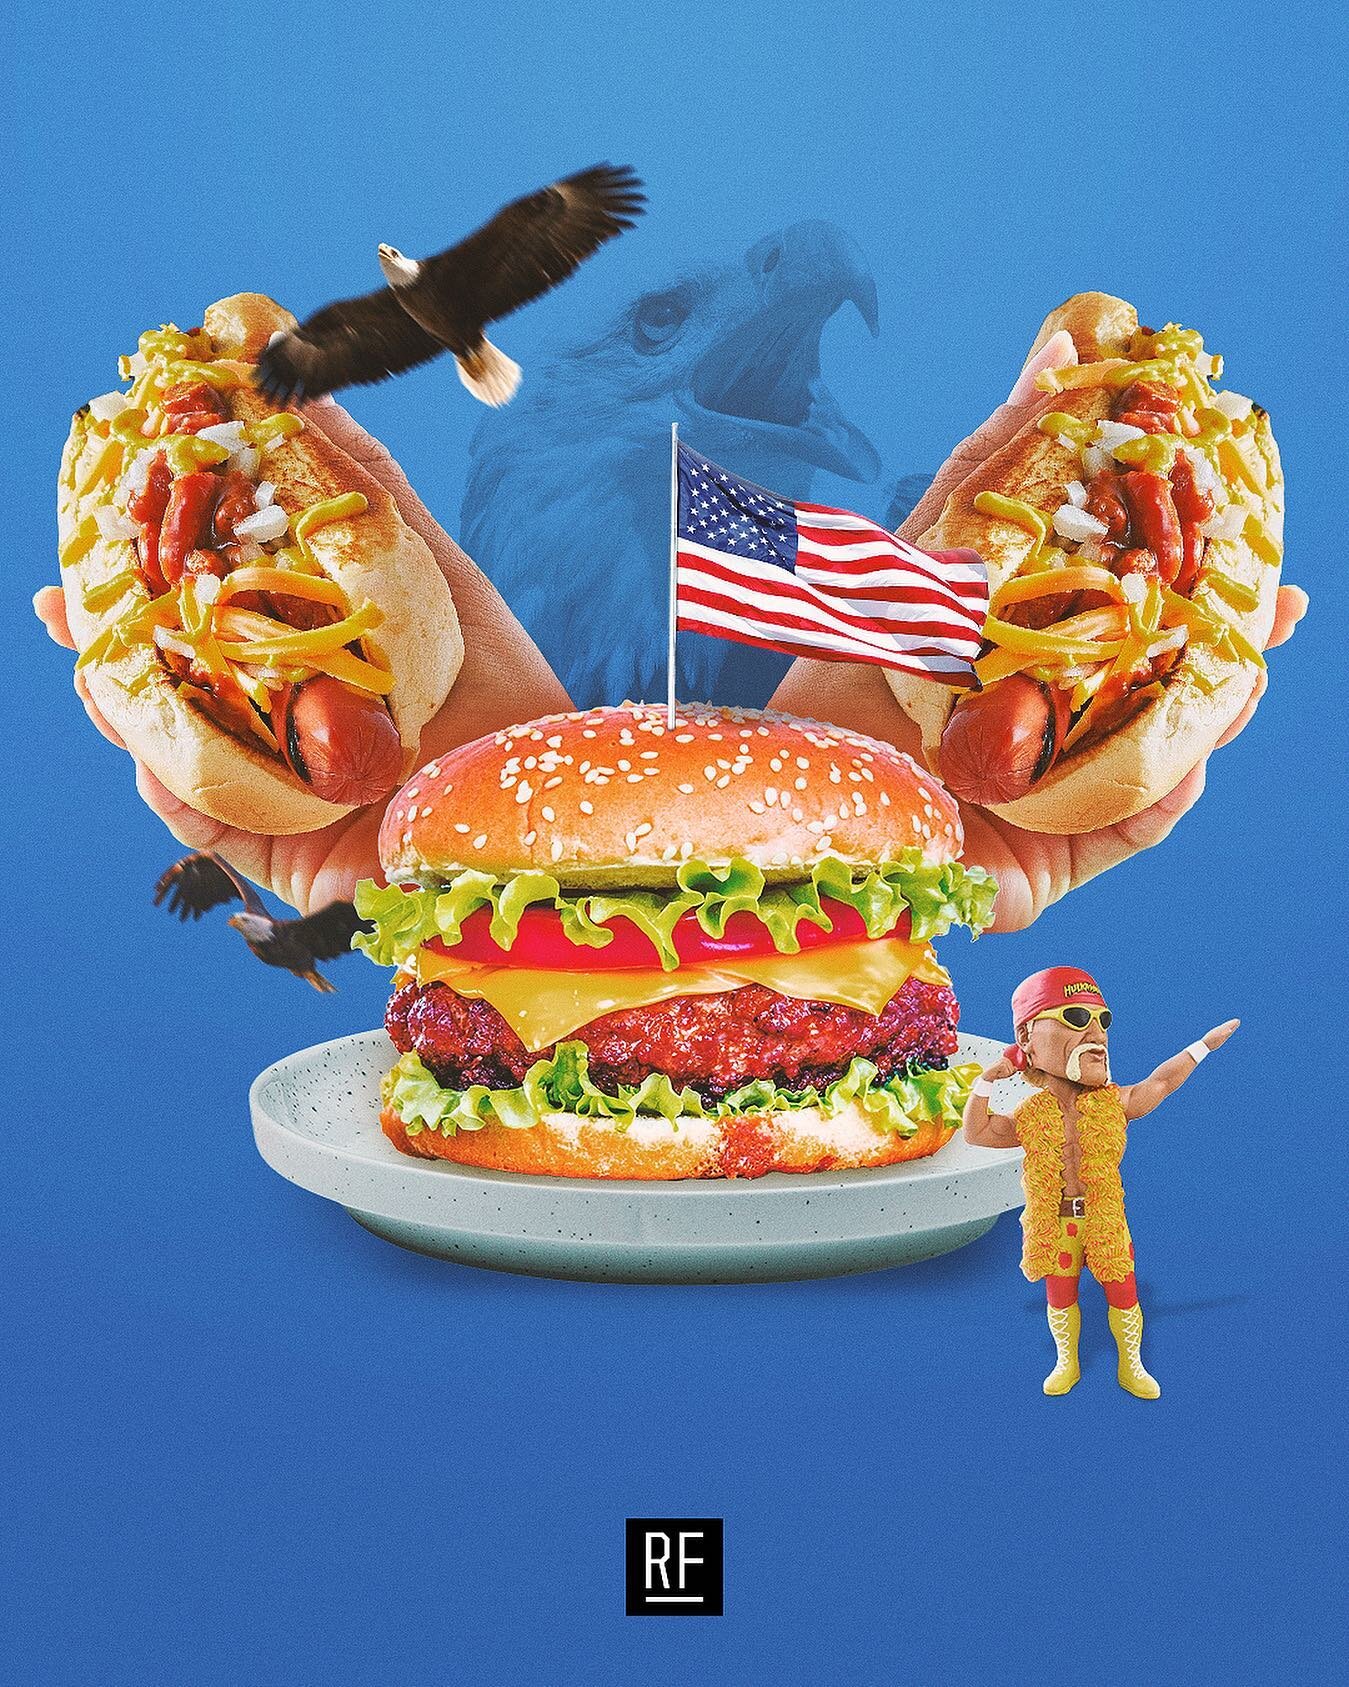 Happy Independence Day errbody. Time for a hotdog or six.